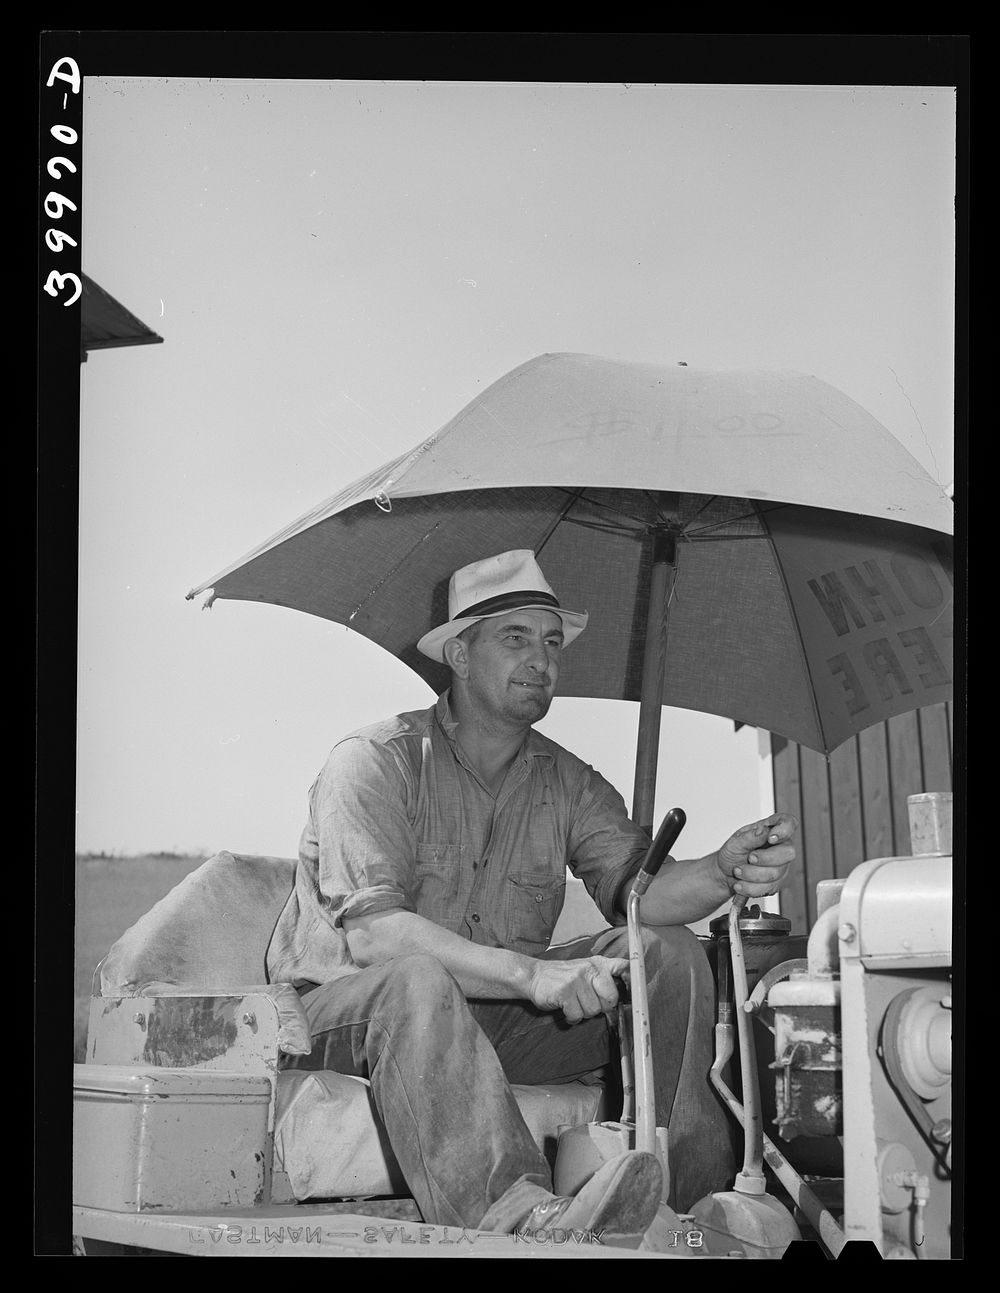 Driver of caterpillar tractor. Wheat field, Whitman County, Washington by Russell Lee